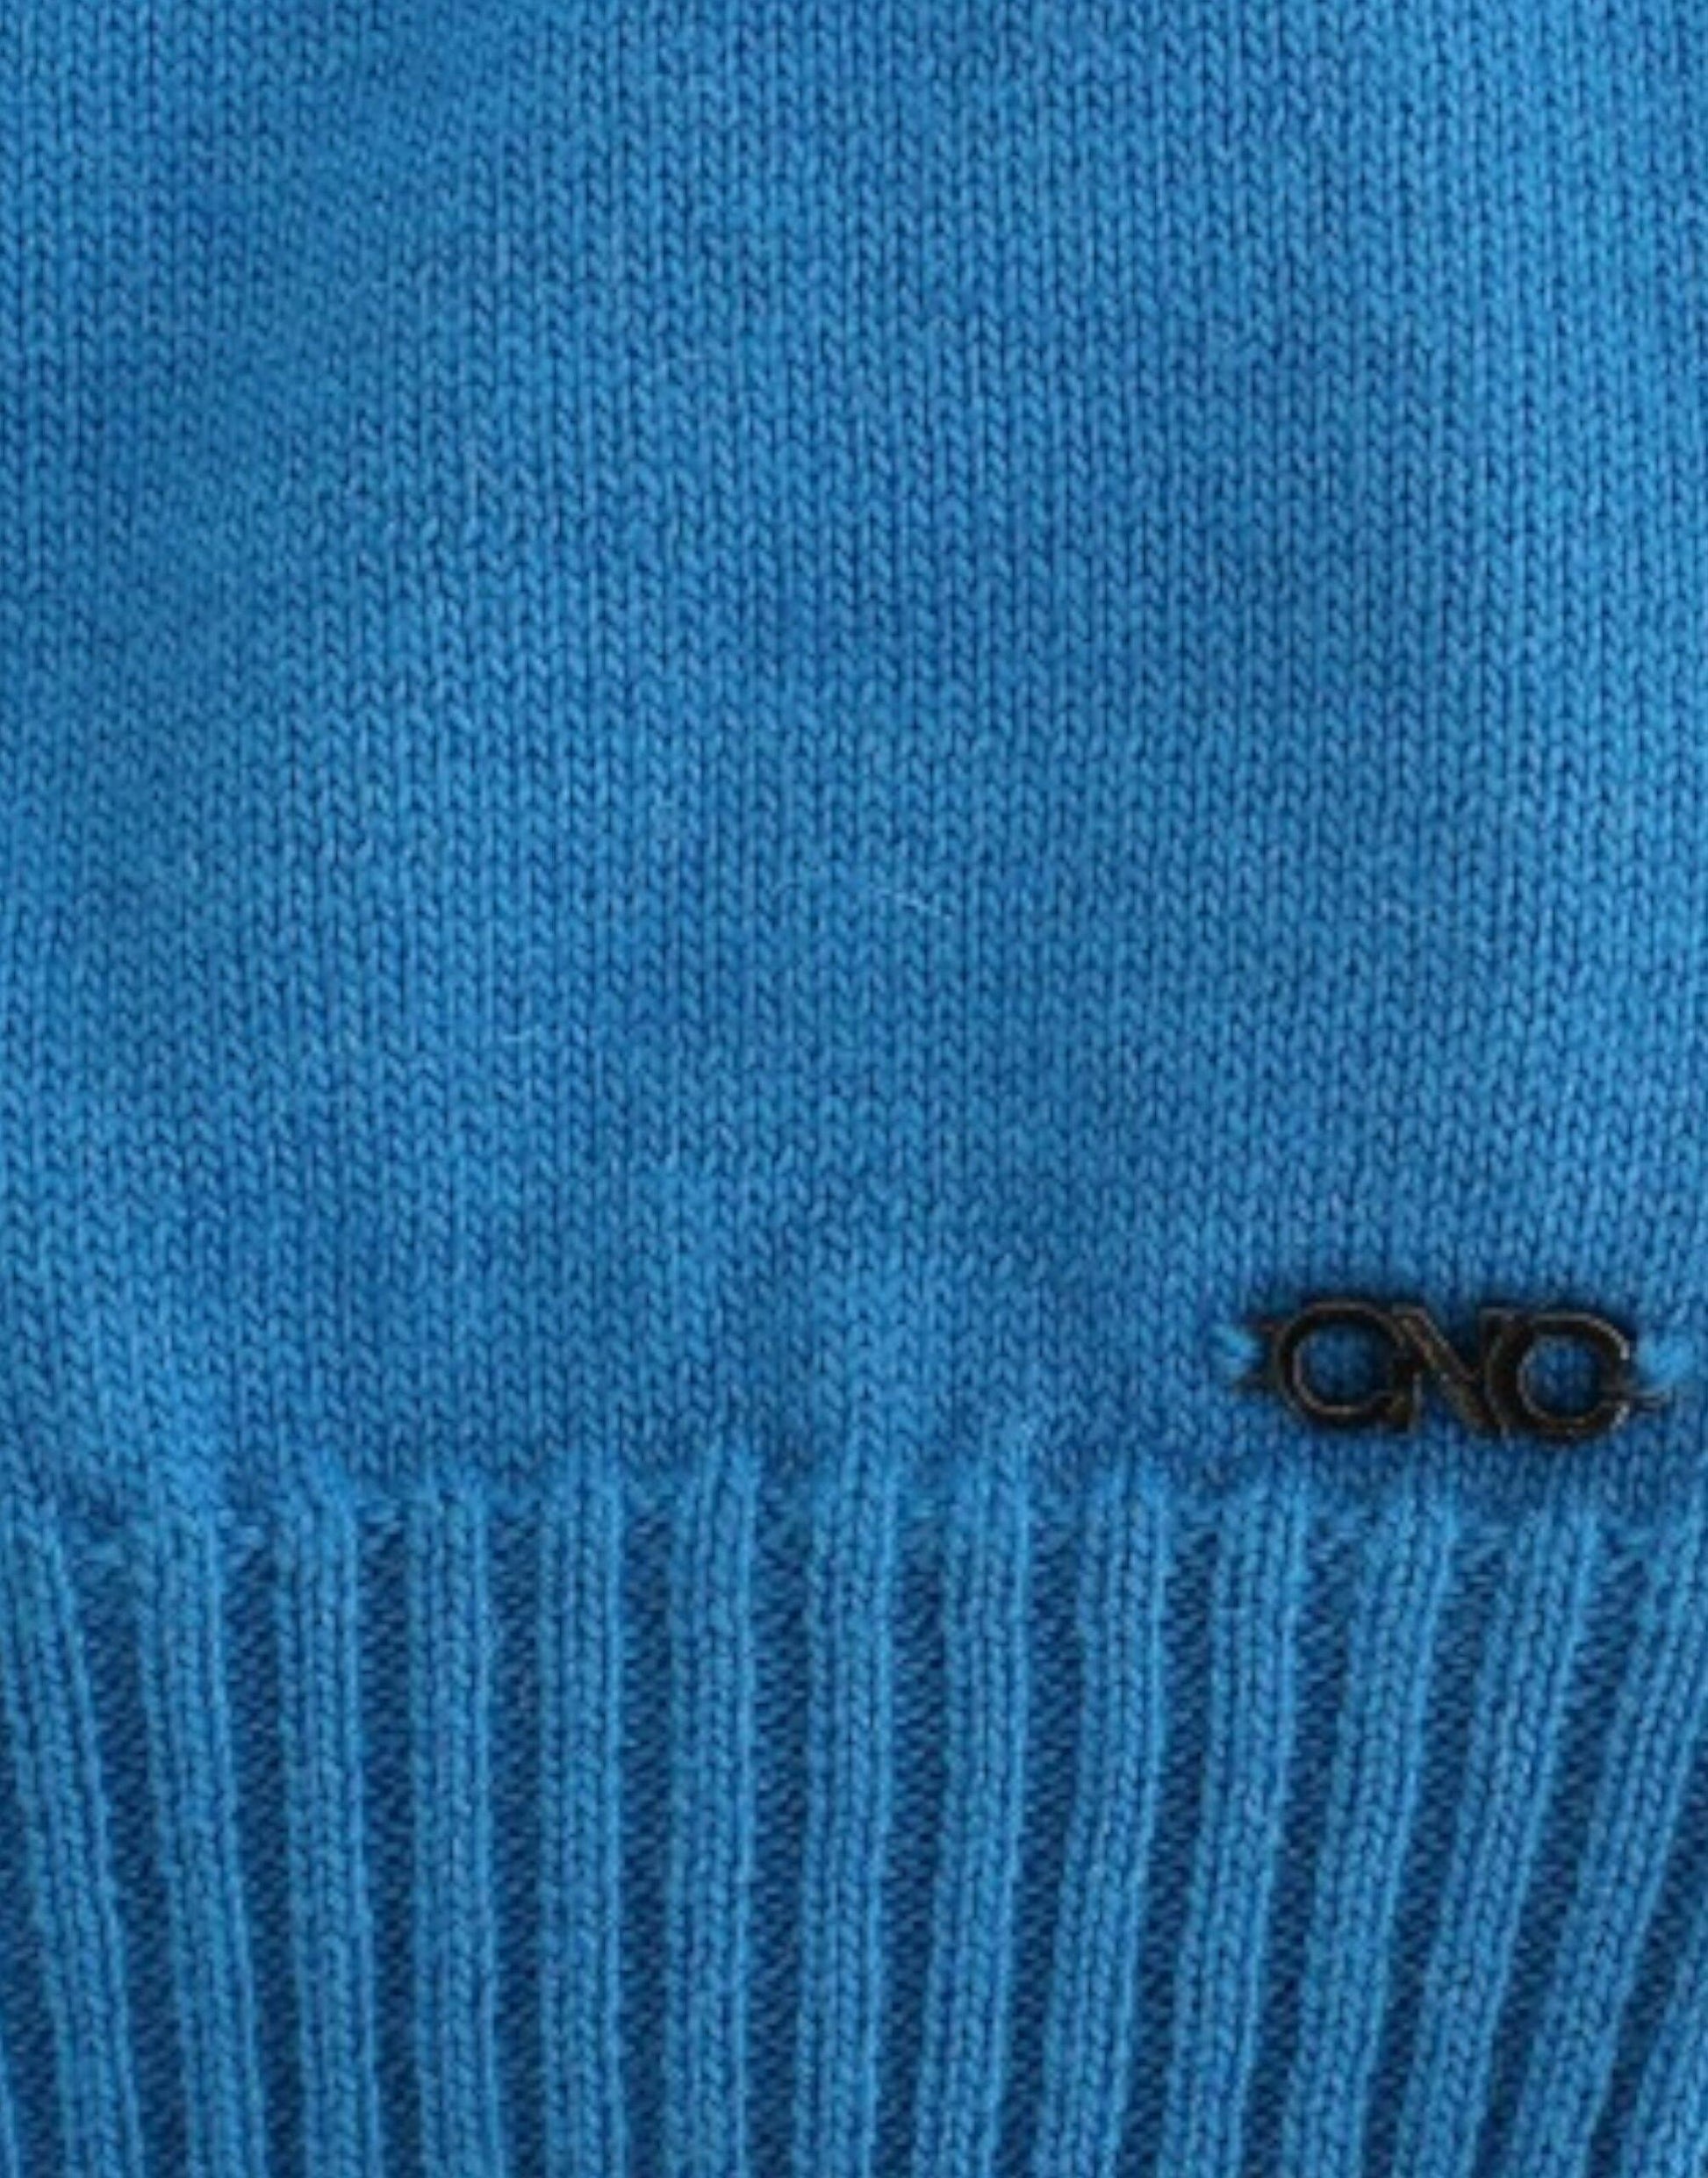 Costume National Cozy Scoop Neck Blue Knit Sweater - PER.FASHION